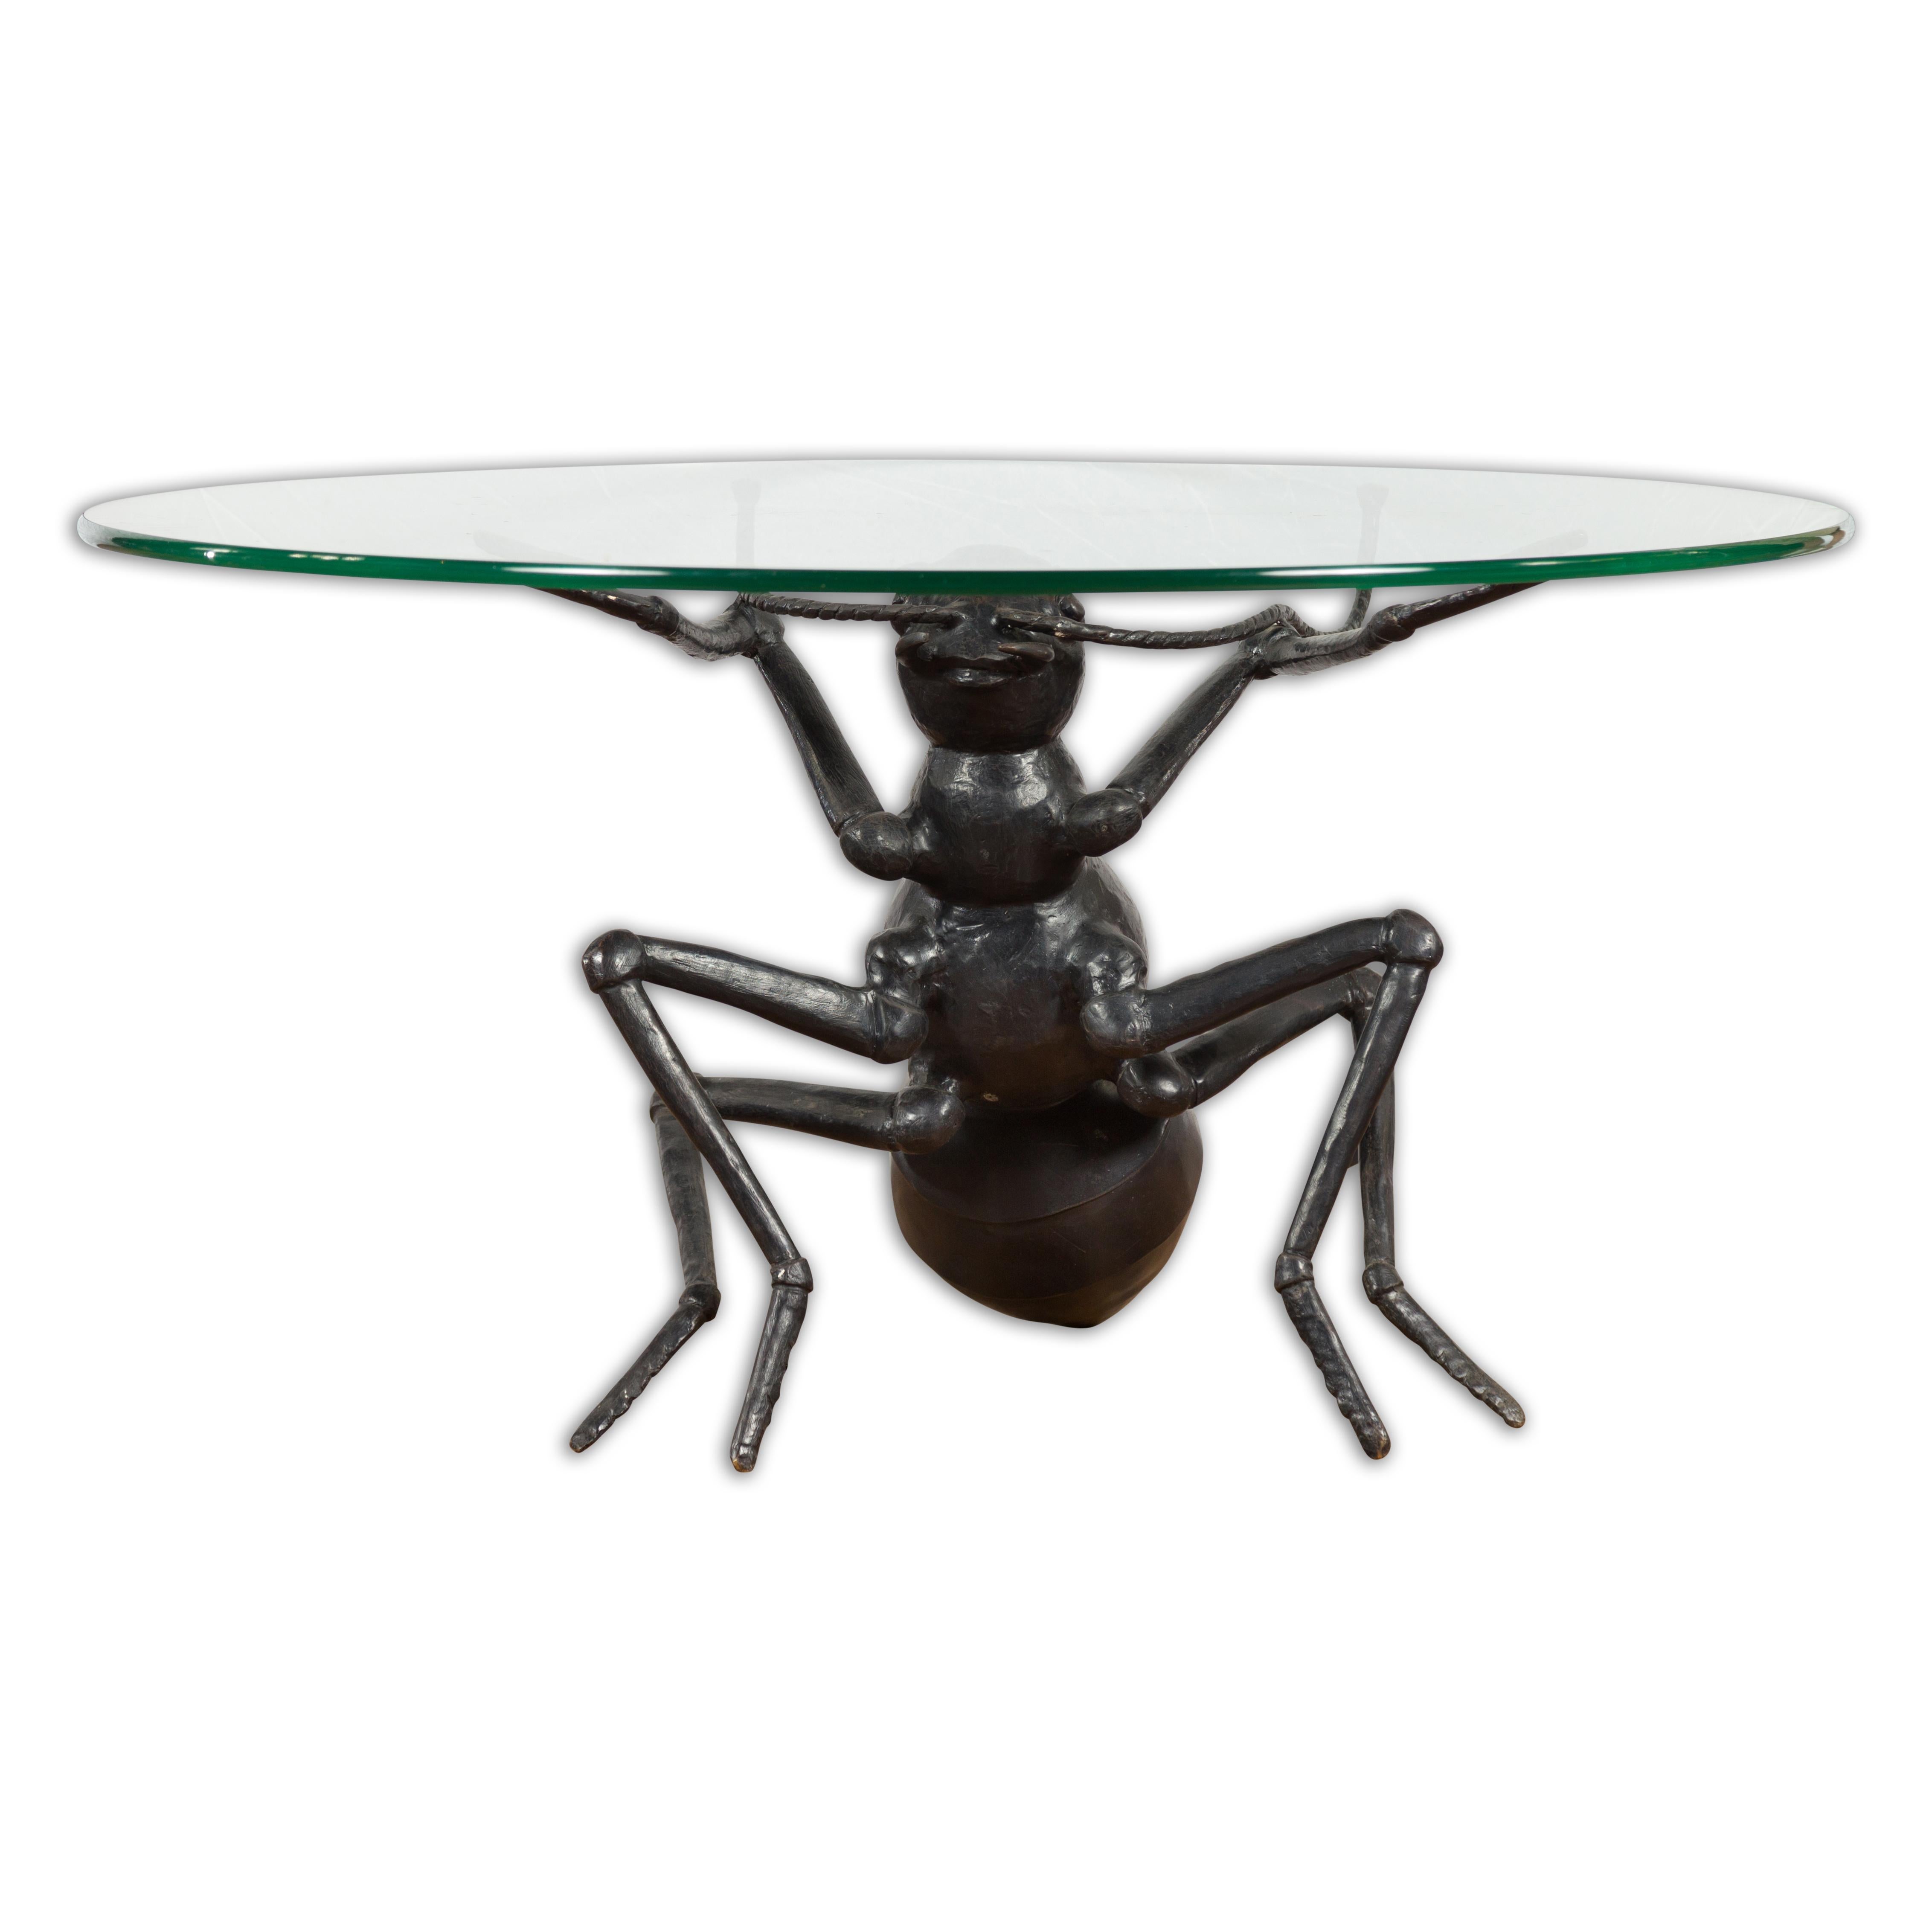 A contemporary lost wax cast bronze coffee table base sculpture from the 21st century depicting an ant. Created with the traditional technique of the lost-wax (à la cire perdue) which allows for great precision and finesse in the details, this